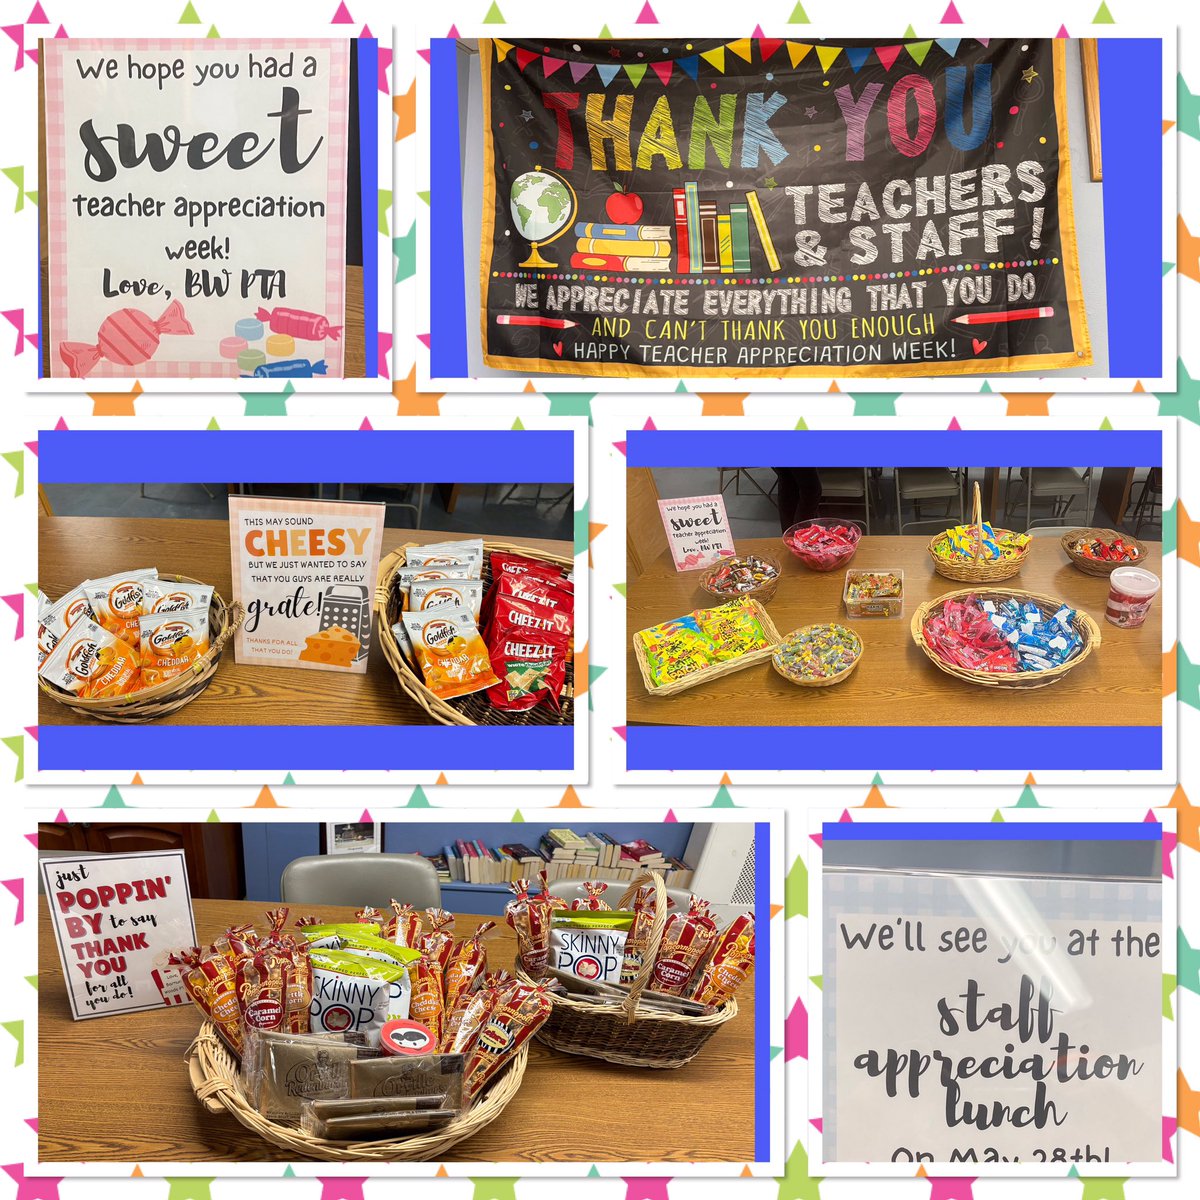 Thank you to @BarnumWoods PTA for the daily surprises during Teacher Appreciation Week! Everyone loved the beautiful sign and all of the sweet and salty treats for our amazing faculty and staff! We are looking forward to the delicious luncheon! Thank you again! @emeadowschools